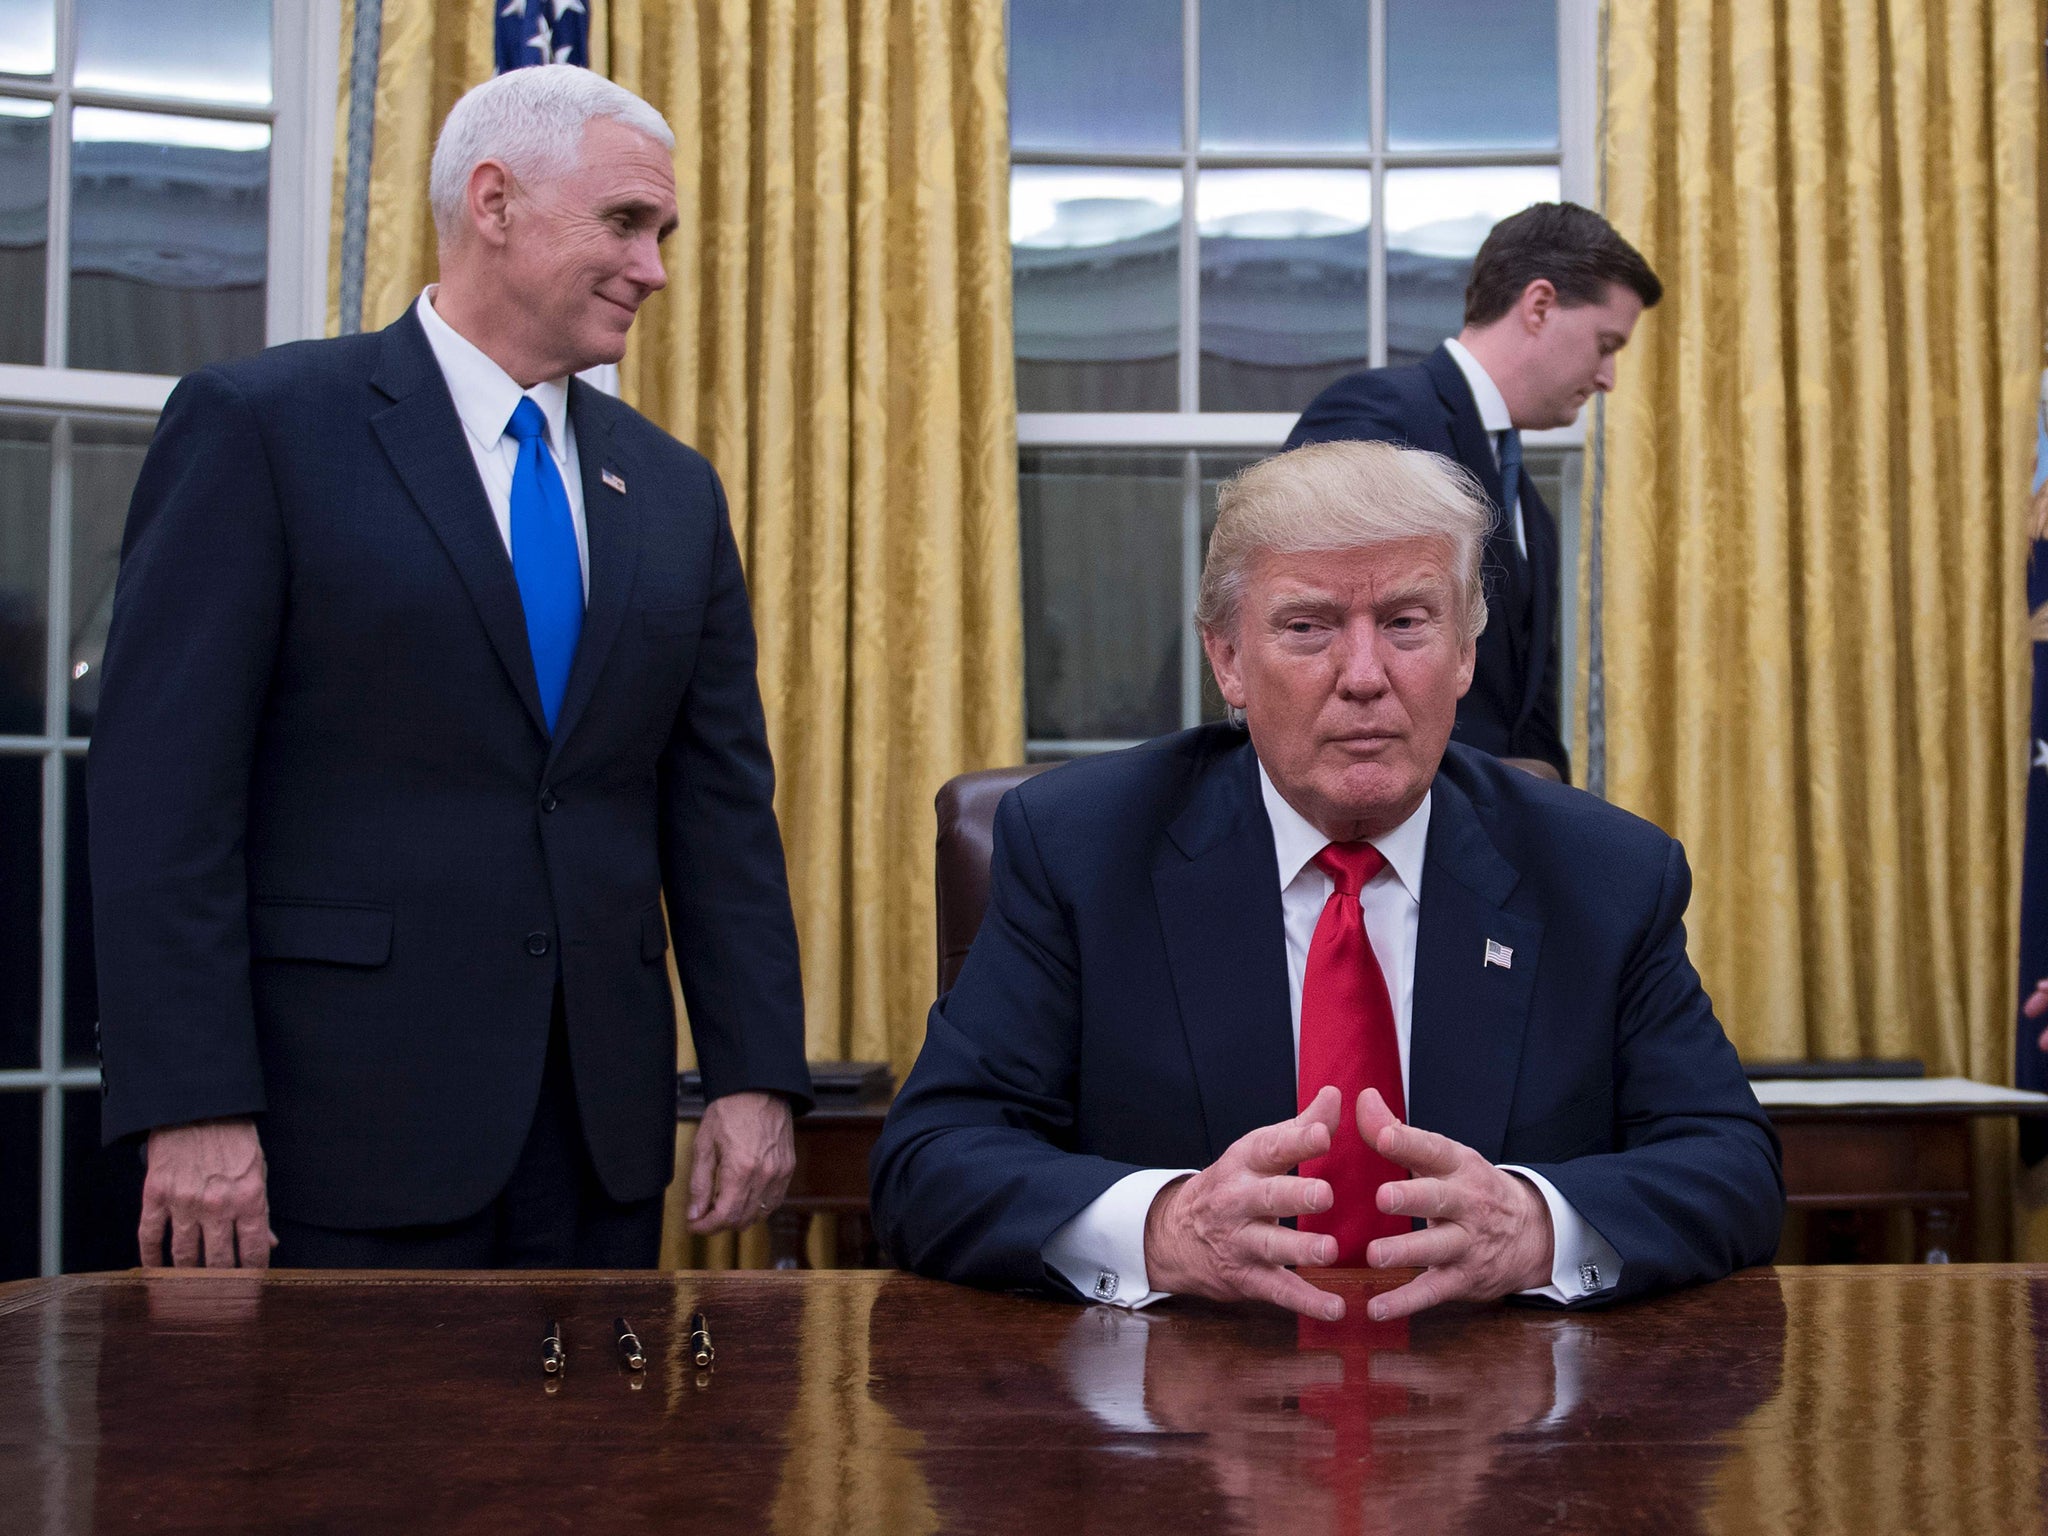 President Donald Trump sits in the Oval Office, before signing approvals for the appointment of Generals Mattis and Kelly to his first Cabinet